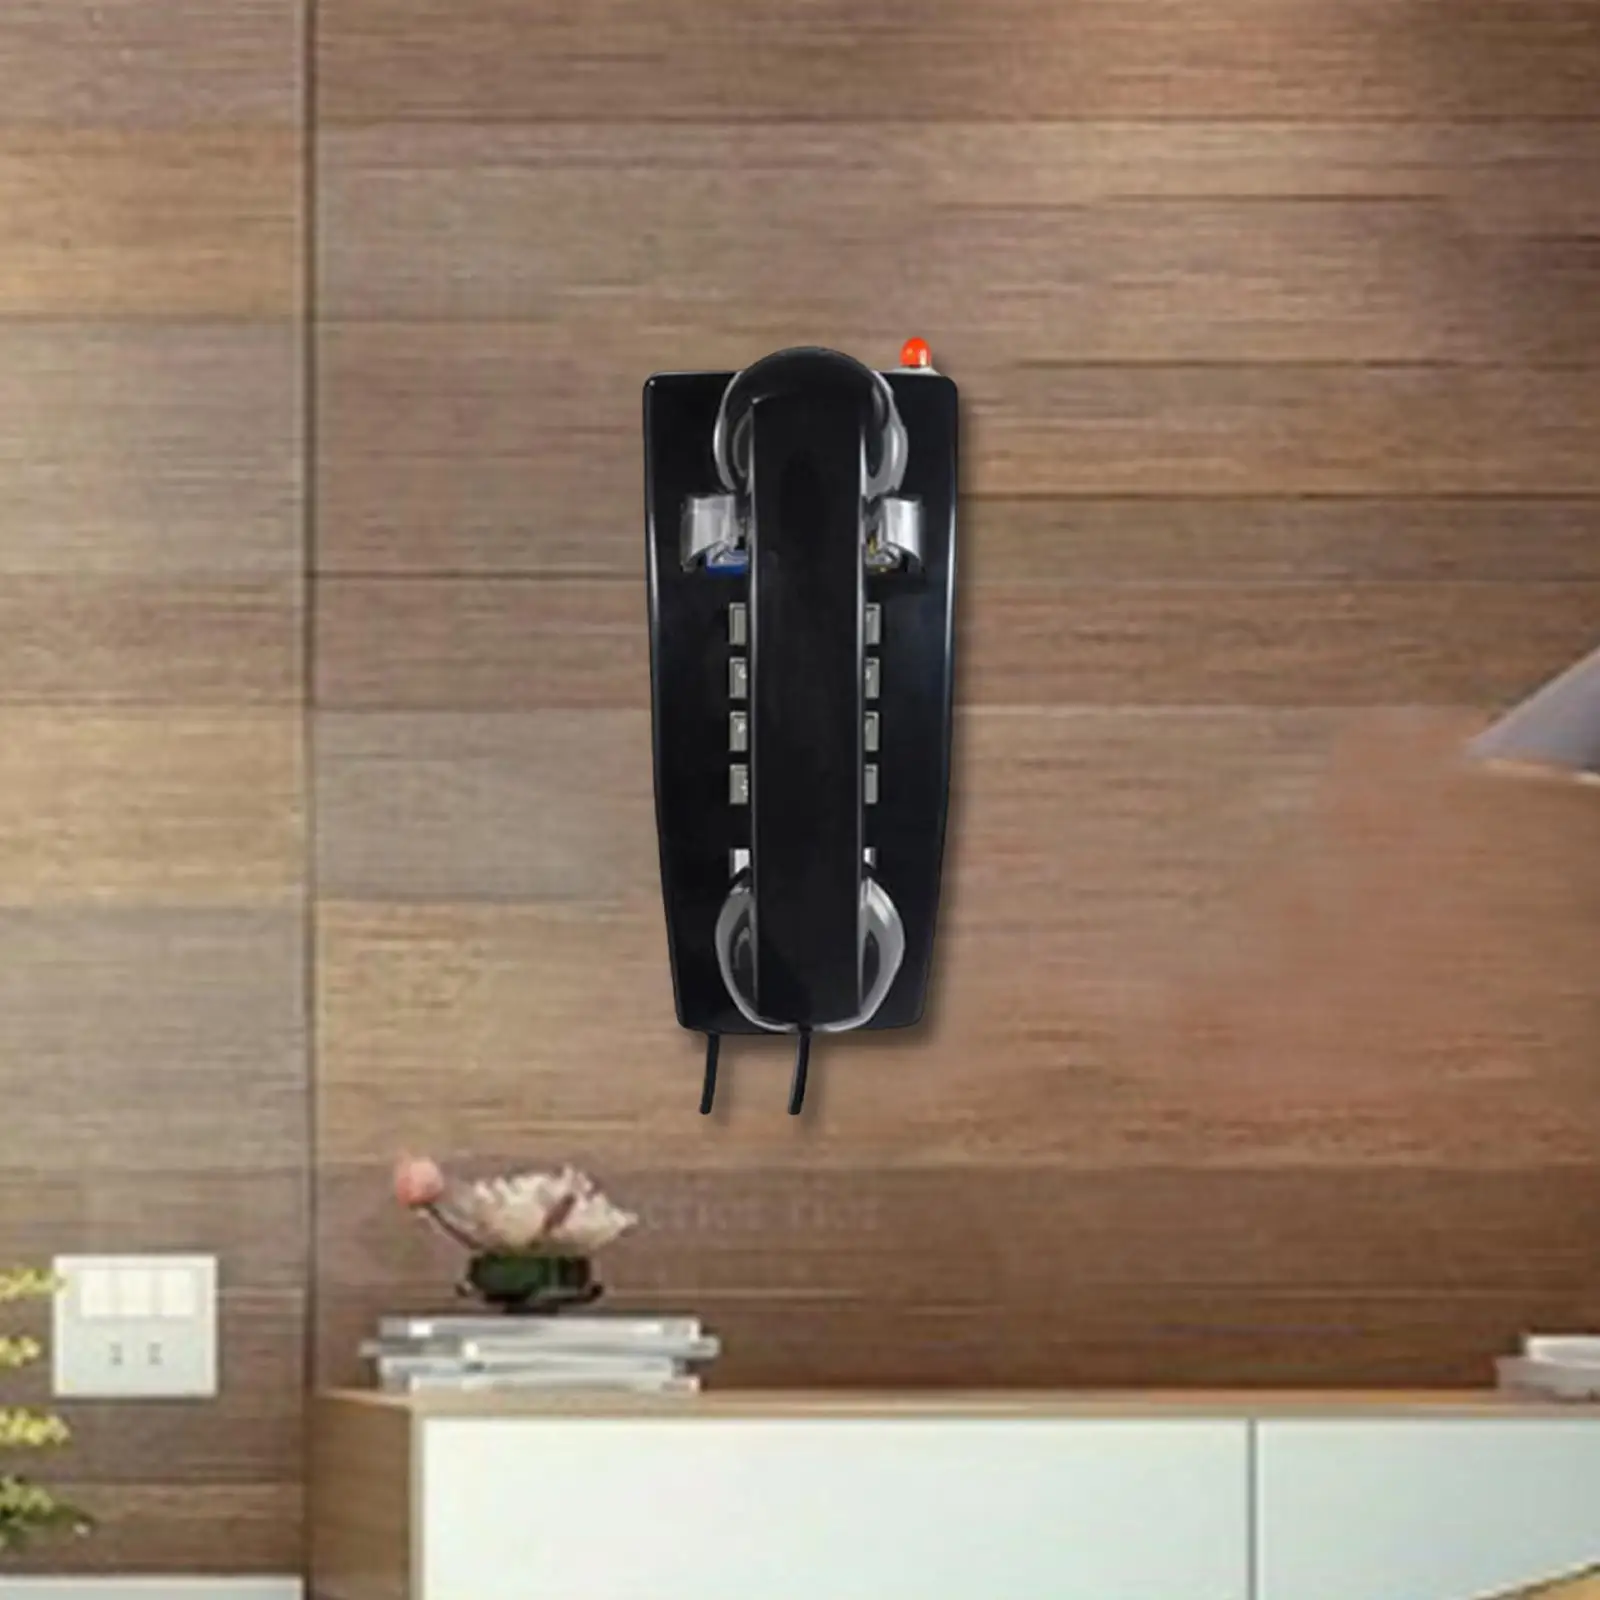 Wall Telephone Wall Mount Phone with Cord Vintage Telephone Wall Phone Wall Mounted Telephone Landline for garage Room